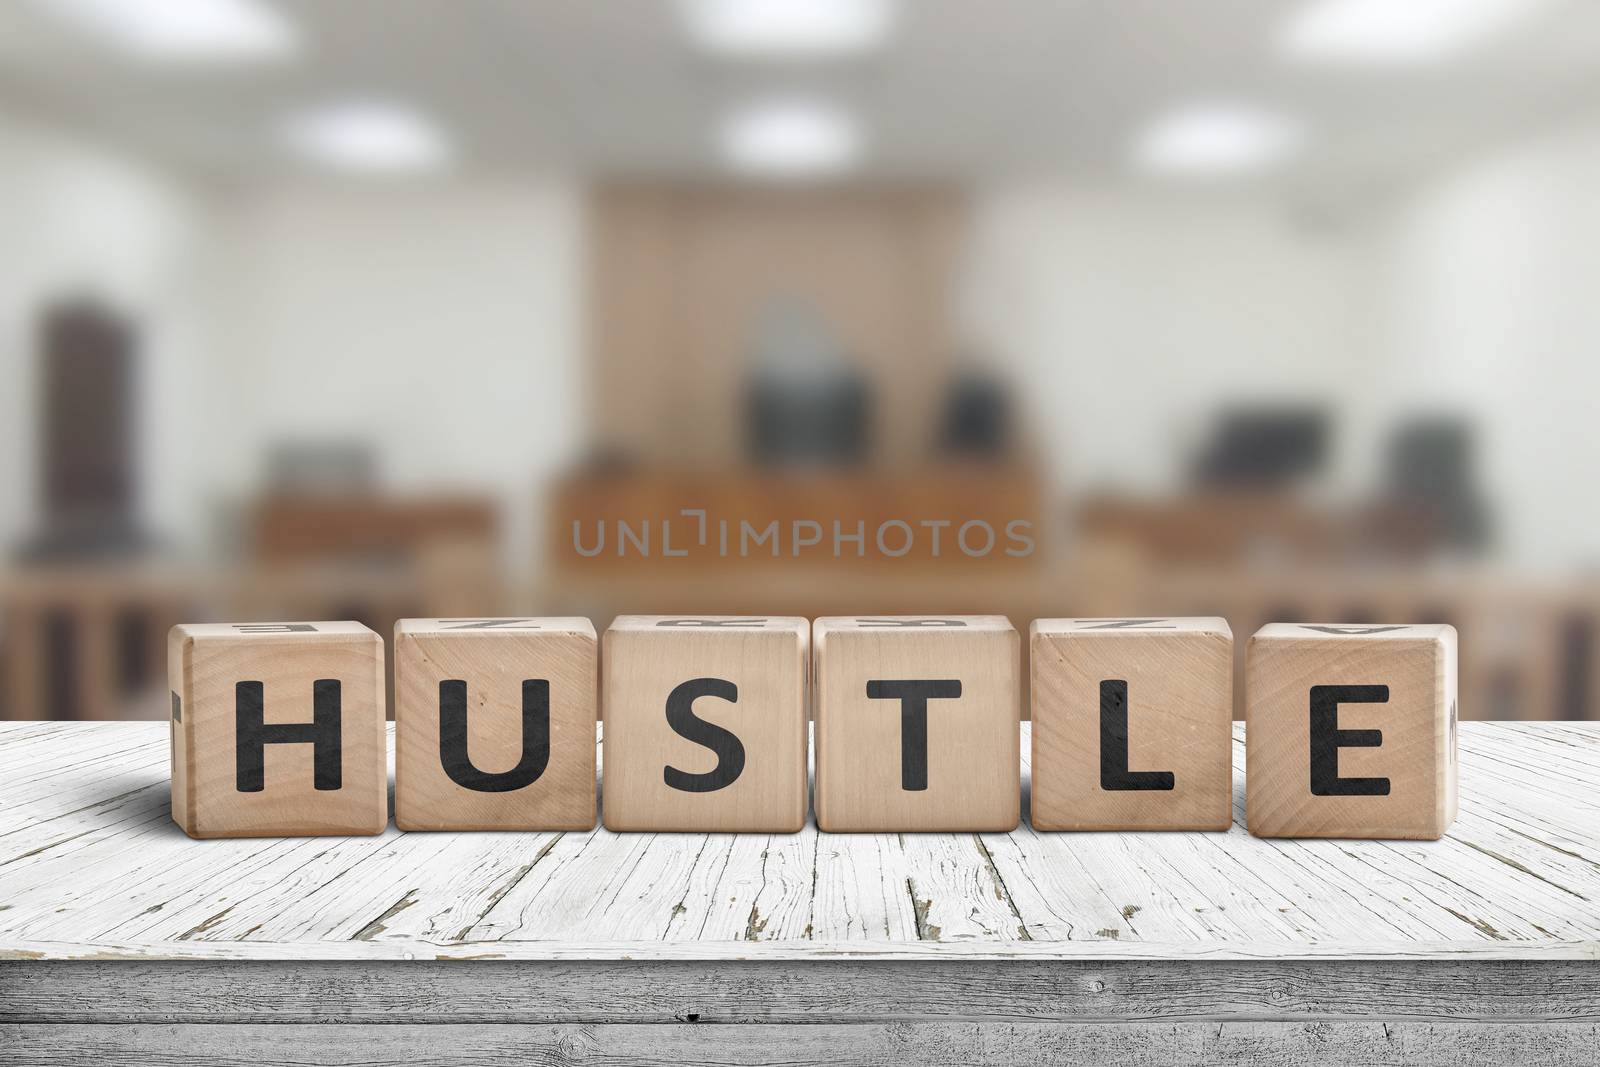 Hustle sign with text on a worn desk in a courtroom with bright lights